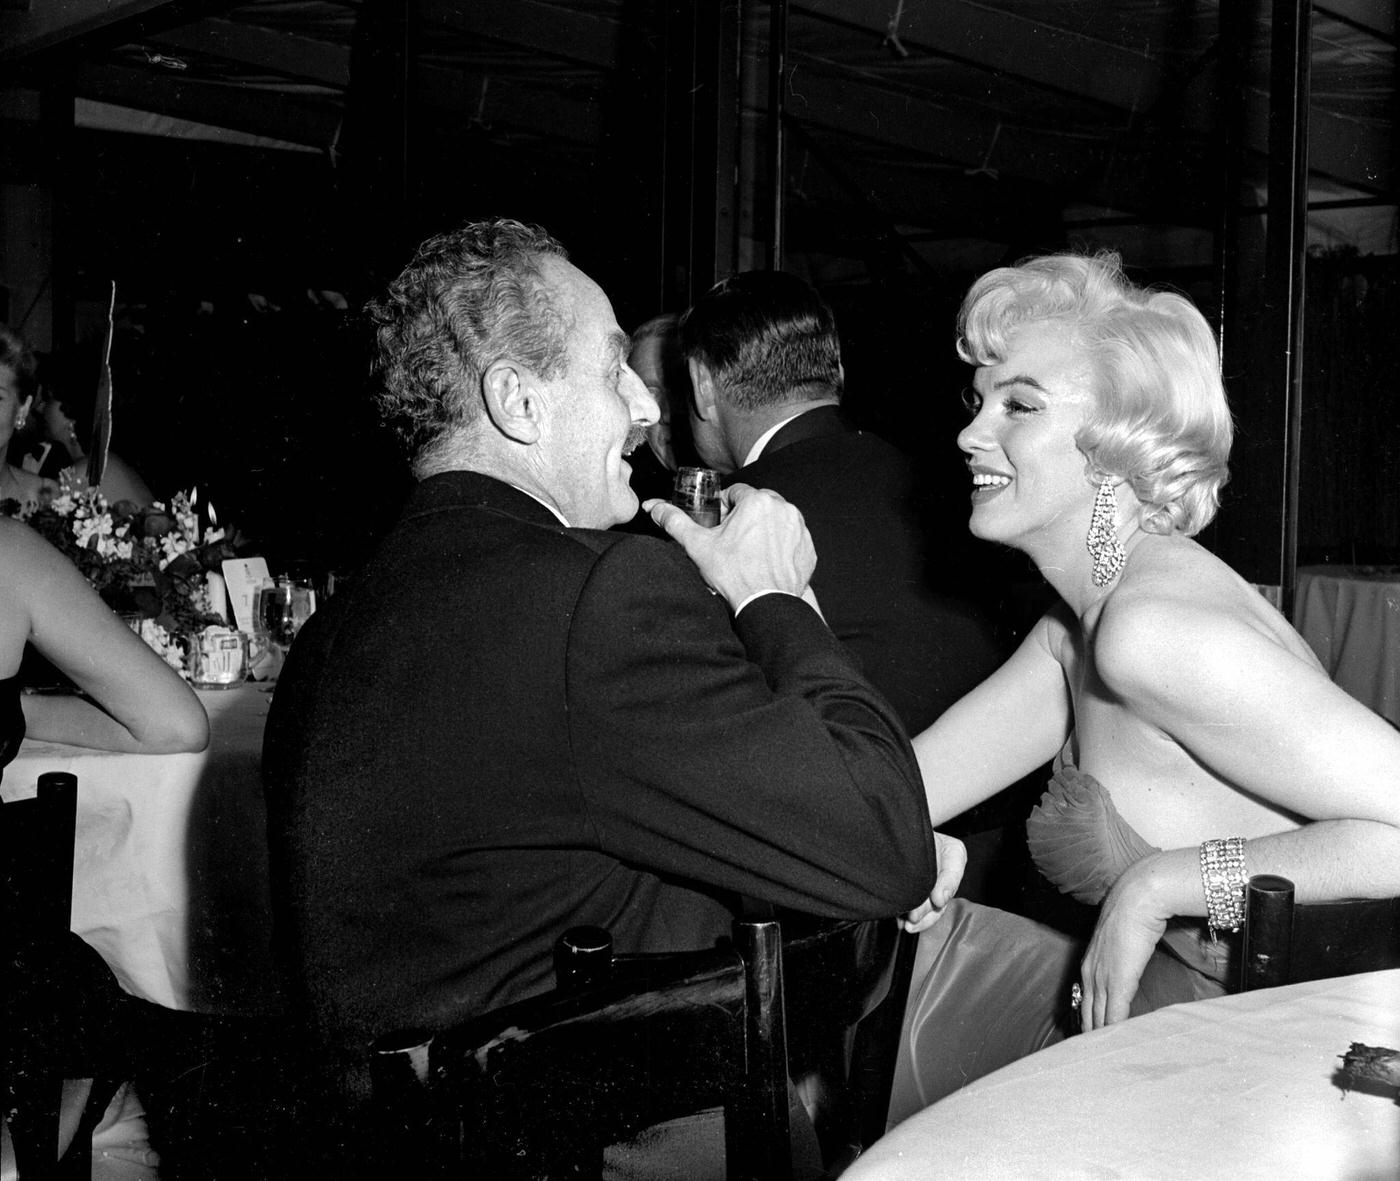 Marilyn Monroe with producer Darryl Zanuck at the wrap party for the filming of "The Seven Year Itch" at Romanoff's Restaurant in 1954